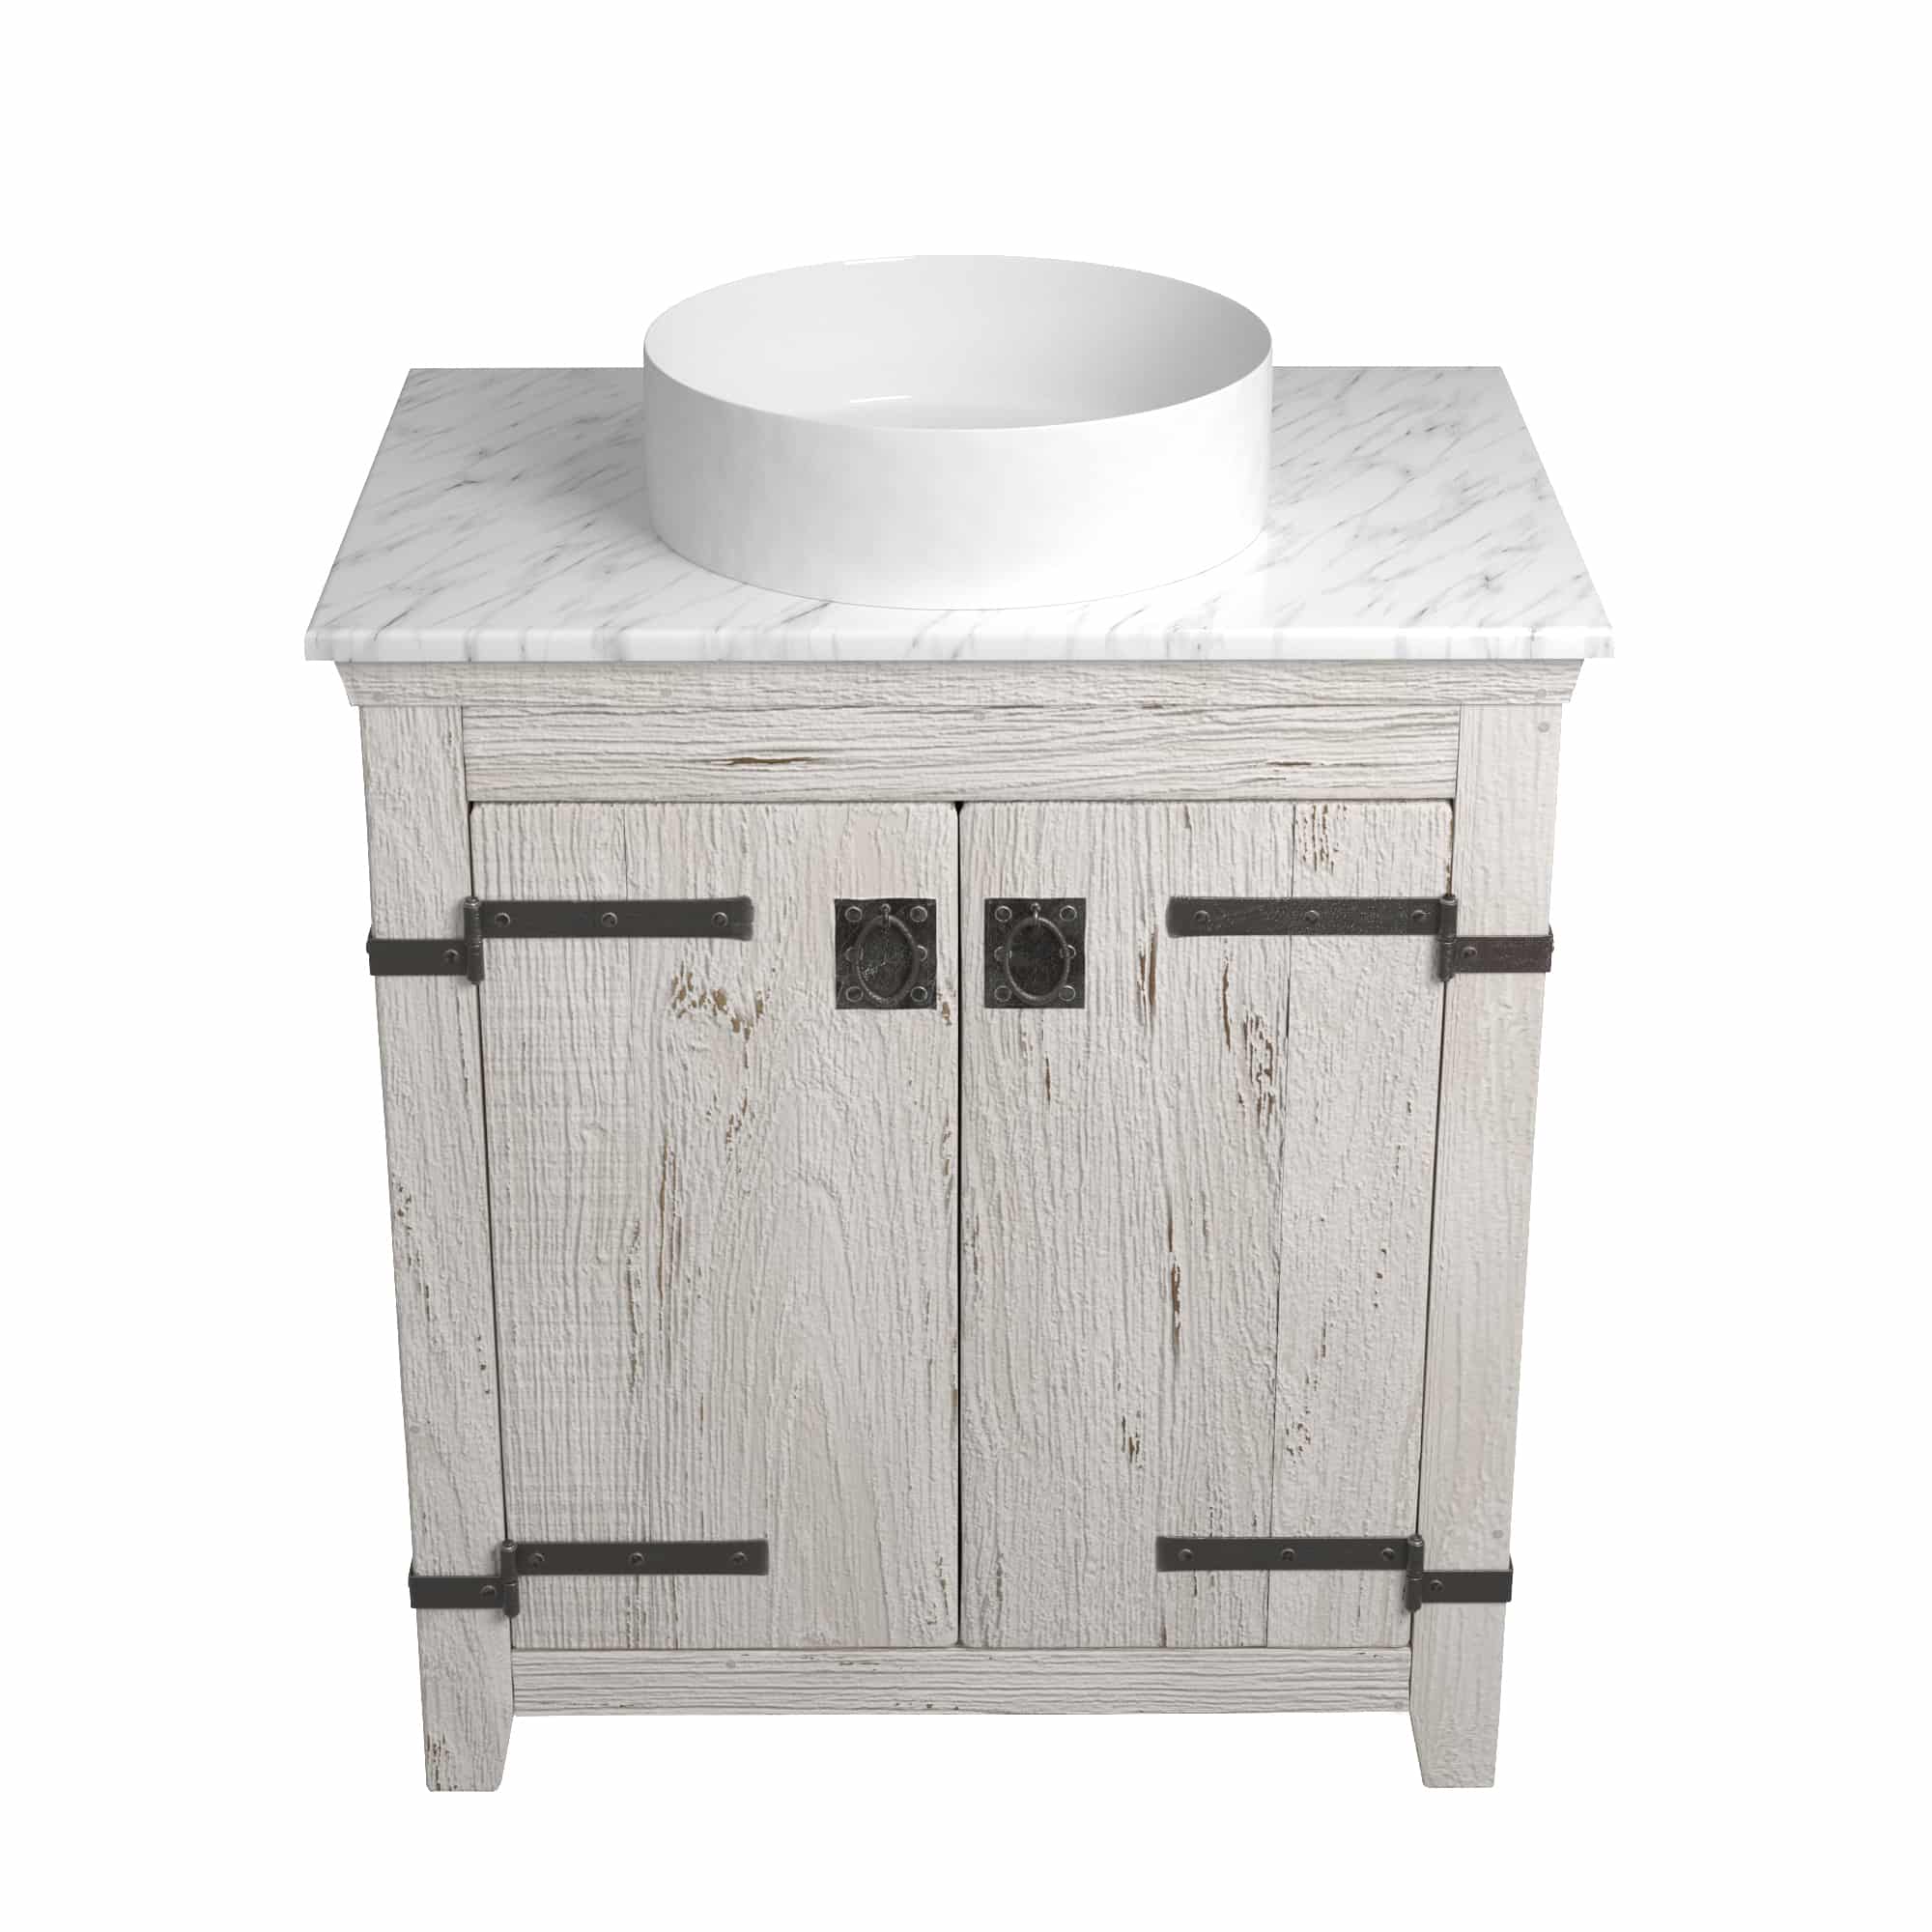 Native Trails 30" Americana Vanity in Whitewash with Carrara Marble Top and Positano in Bianco, Single Faucet Hole, BND30-VB-CT-MG-049